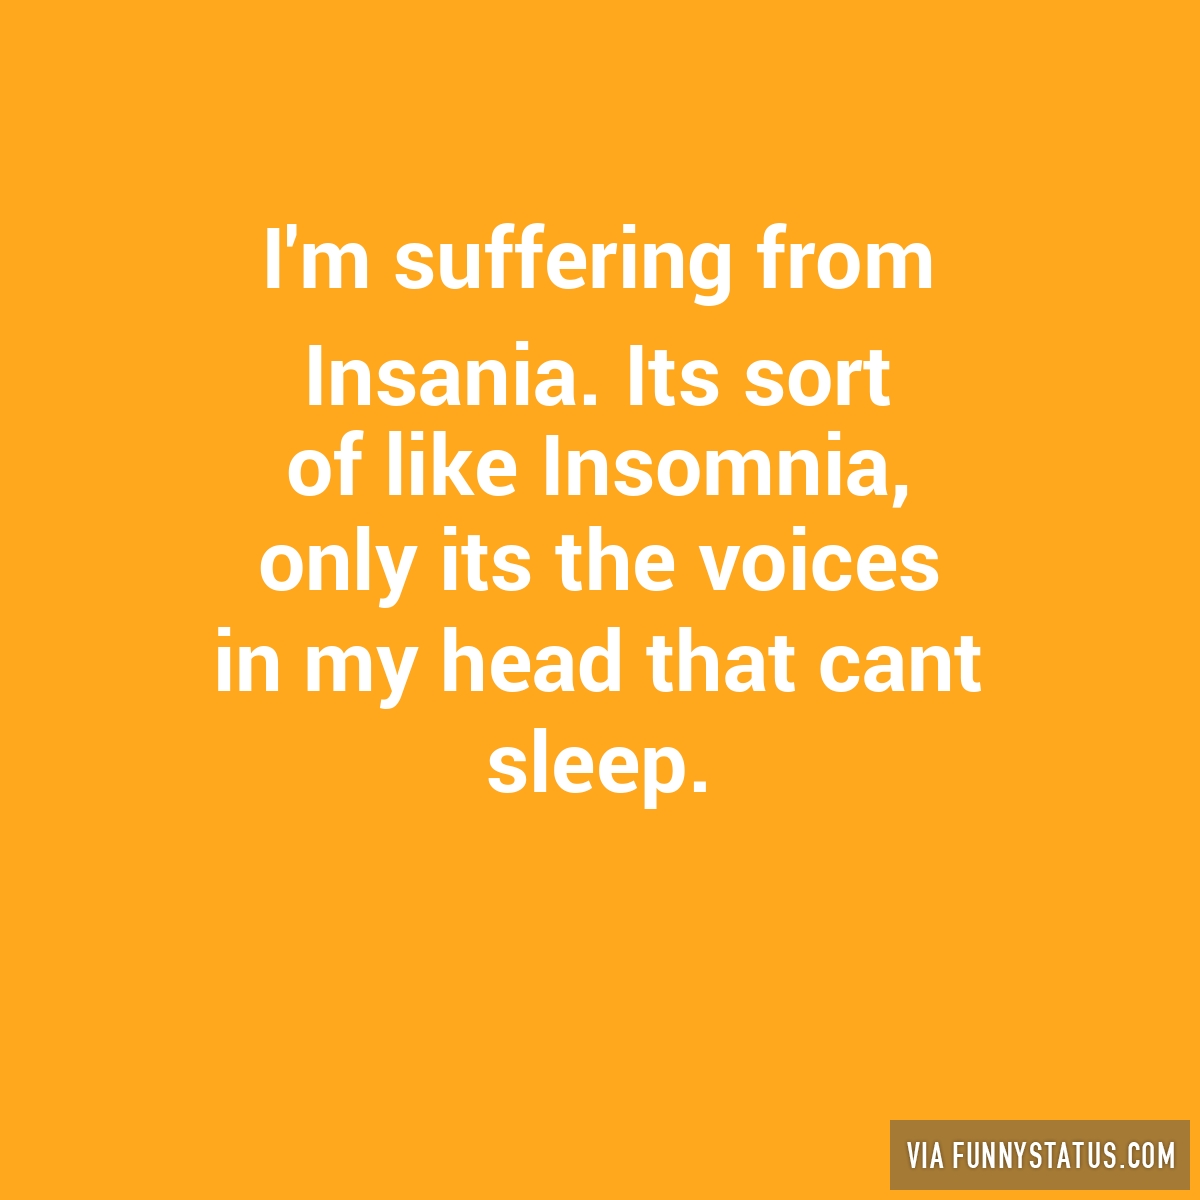 Im Suffering From Insania Its Sort Of Like Insomnia Funny Status